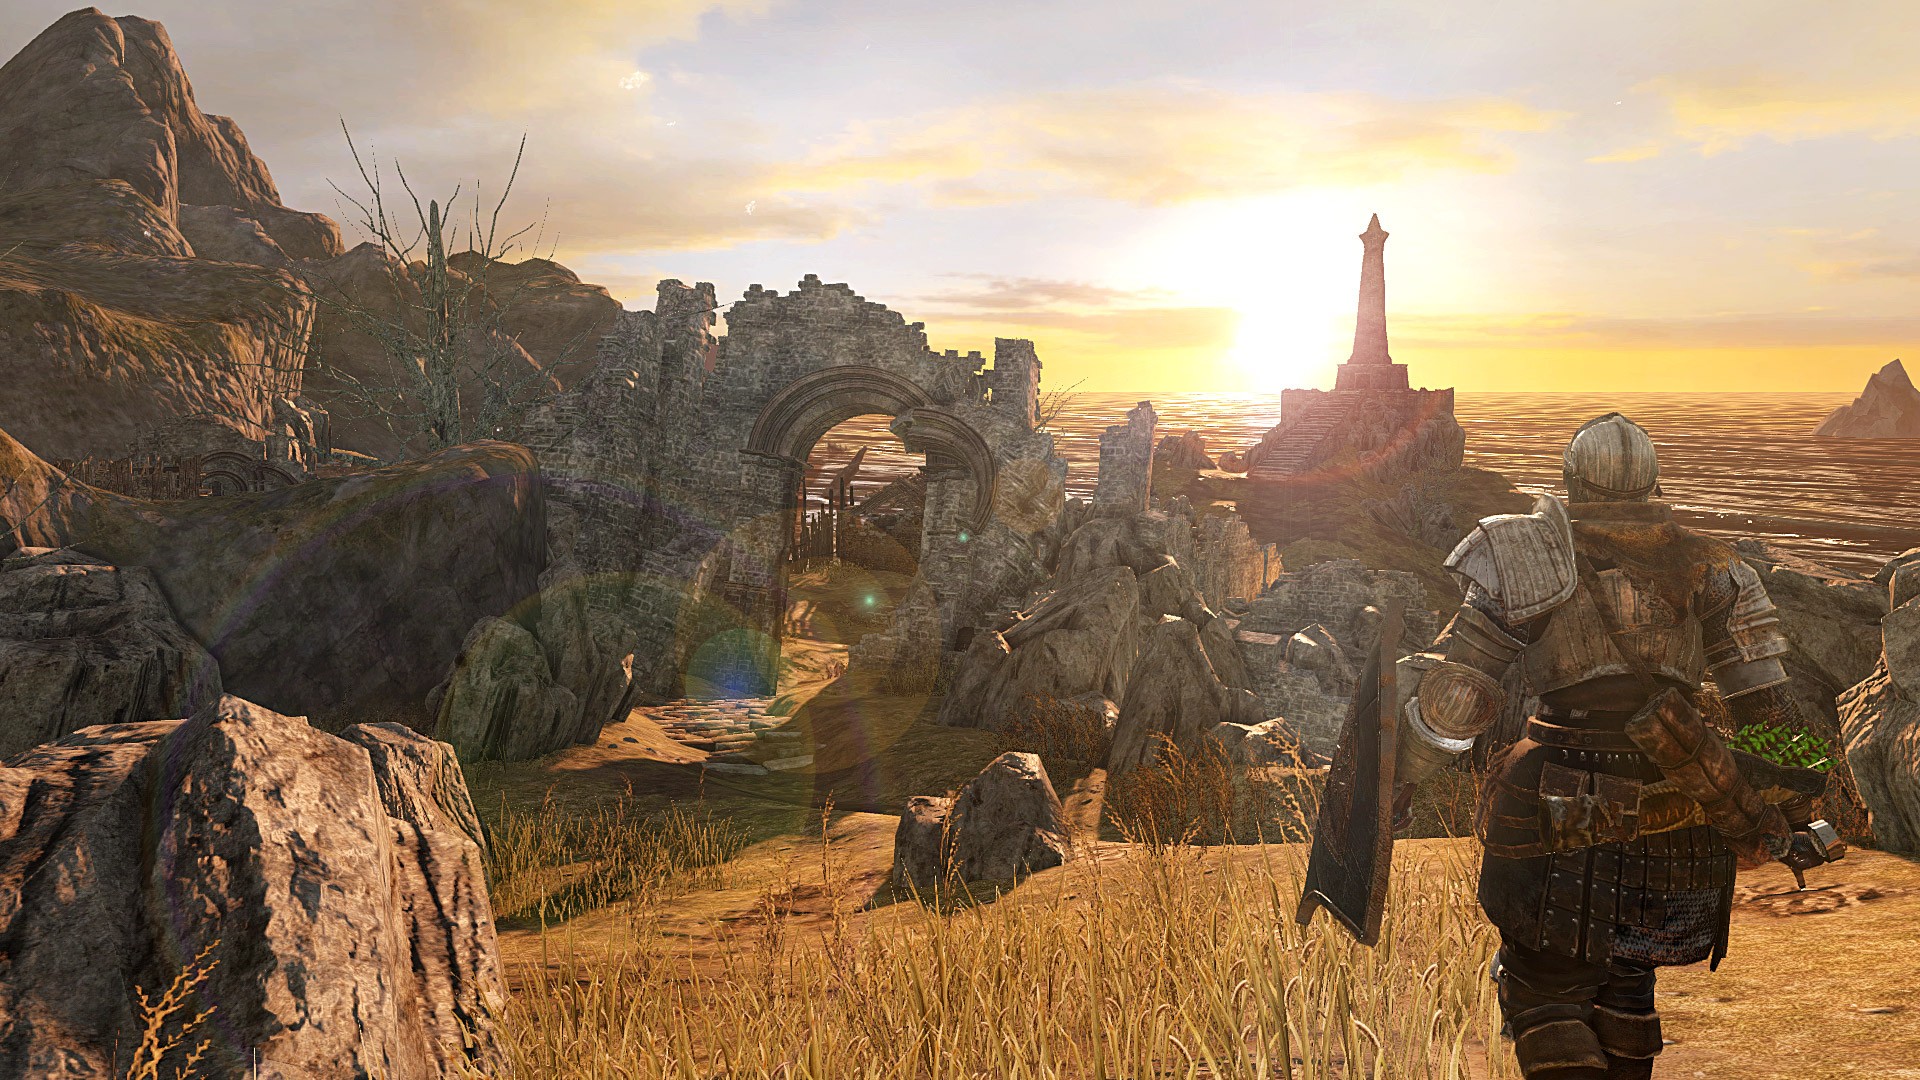 debut Dark Souls 2: Scholar of the First Sin for the PS4 and Xbox One